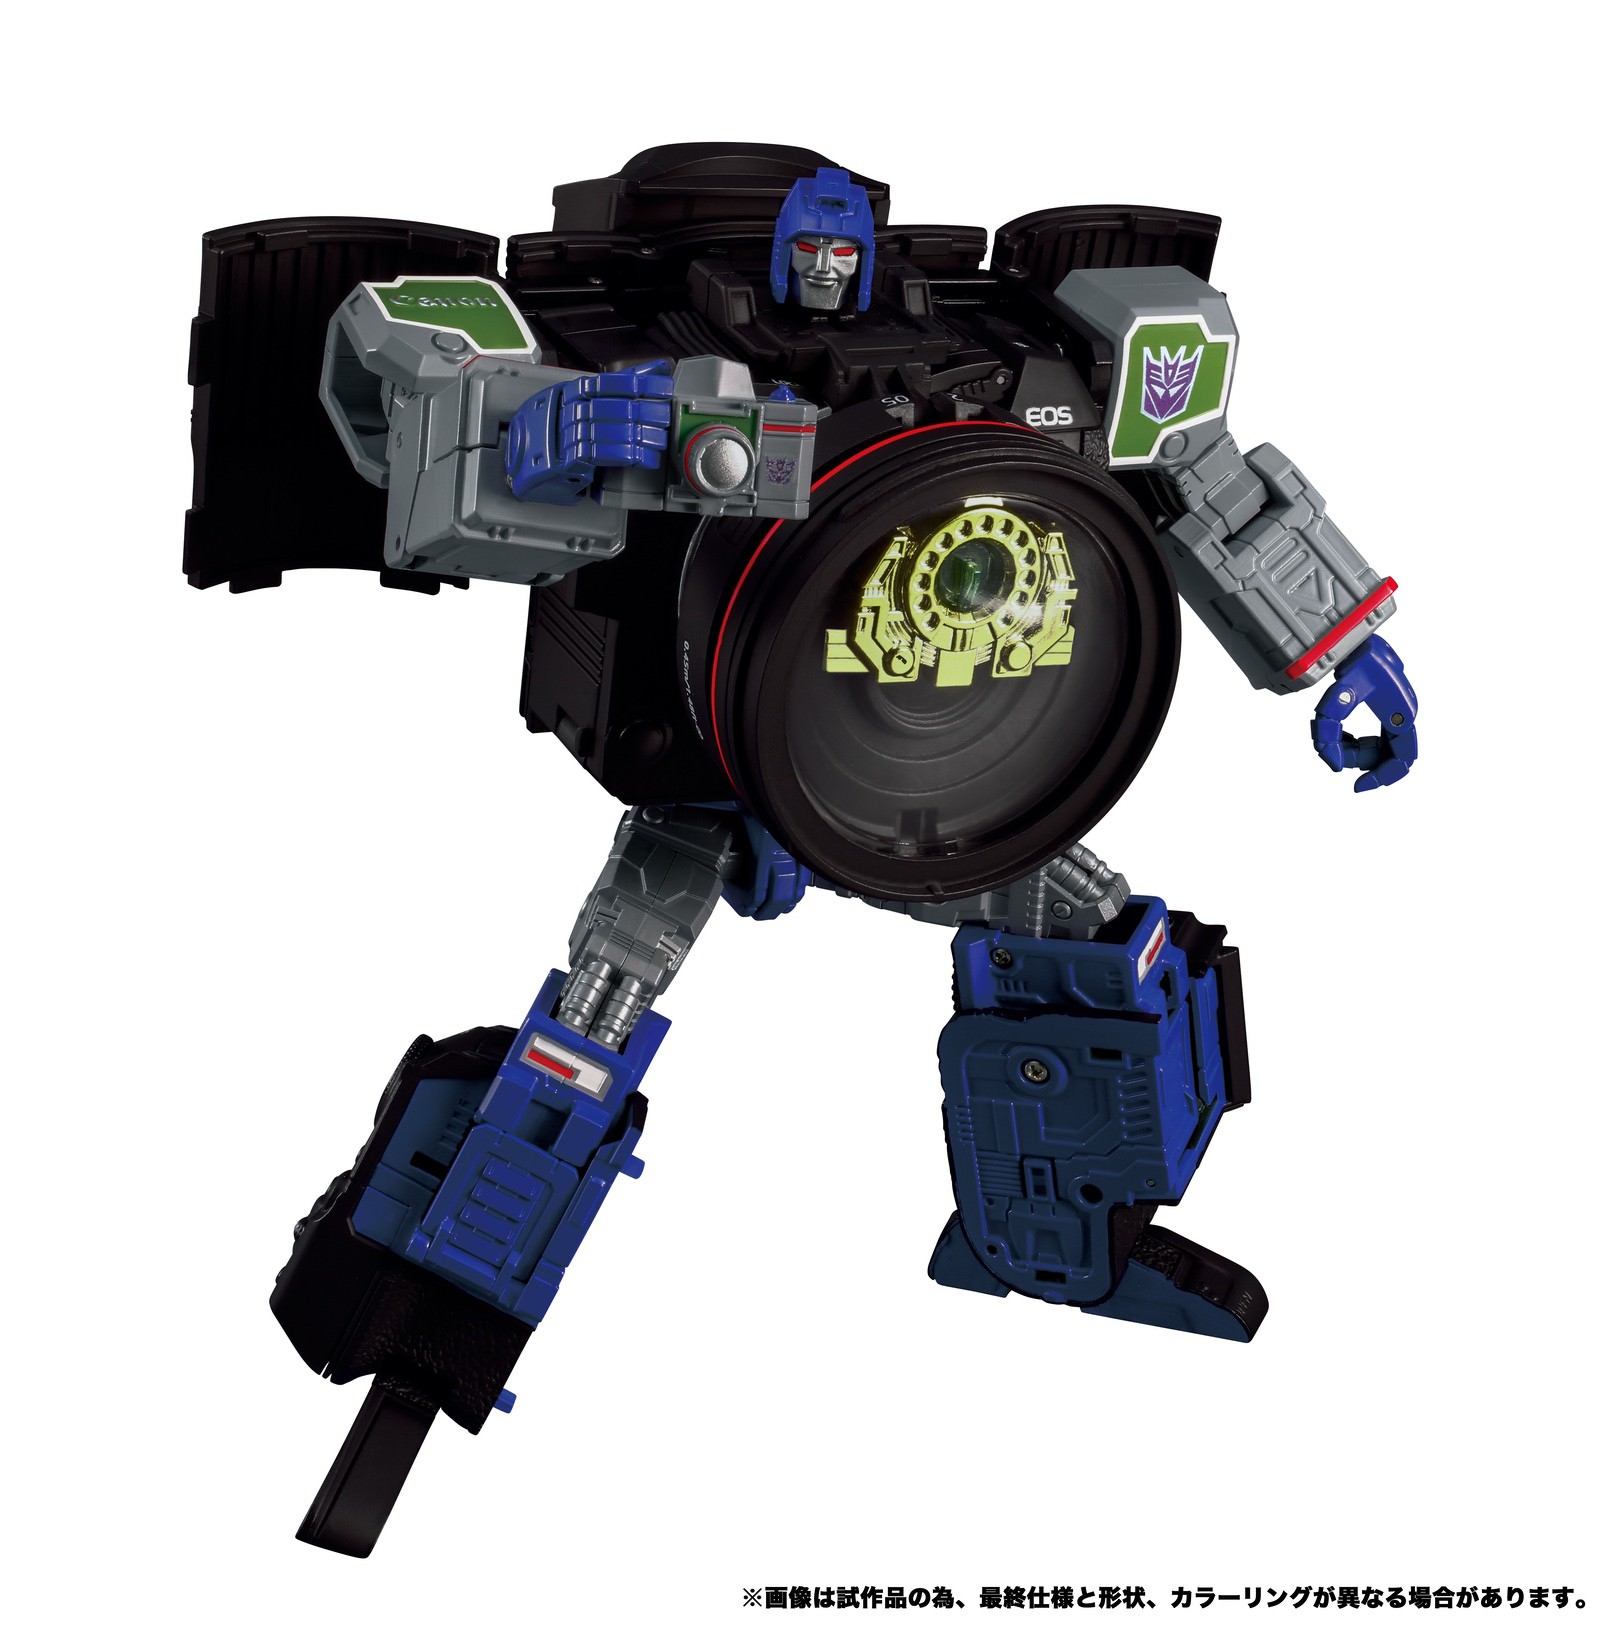 Canon R5 Transformers Toy 02